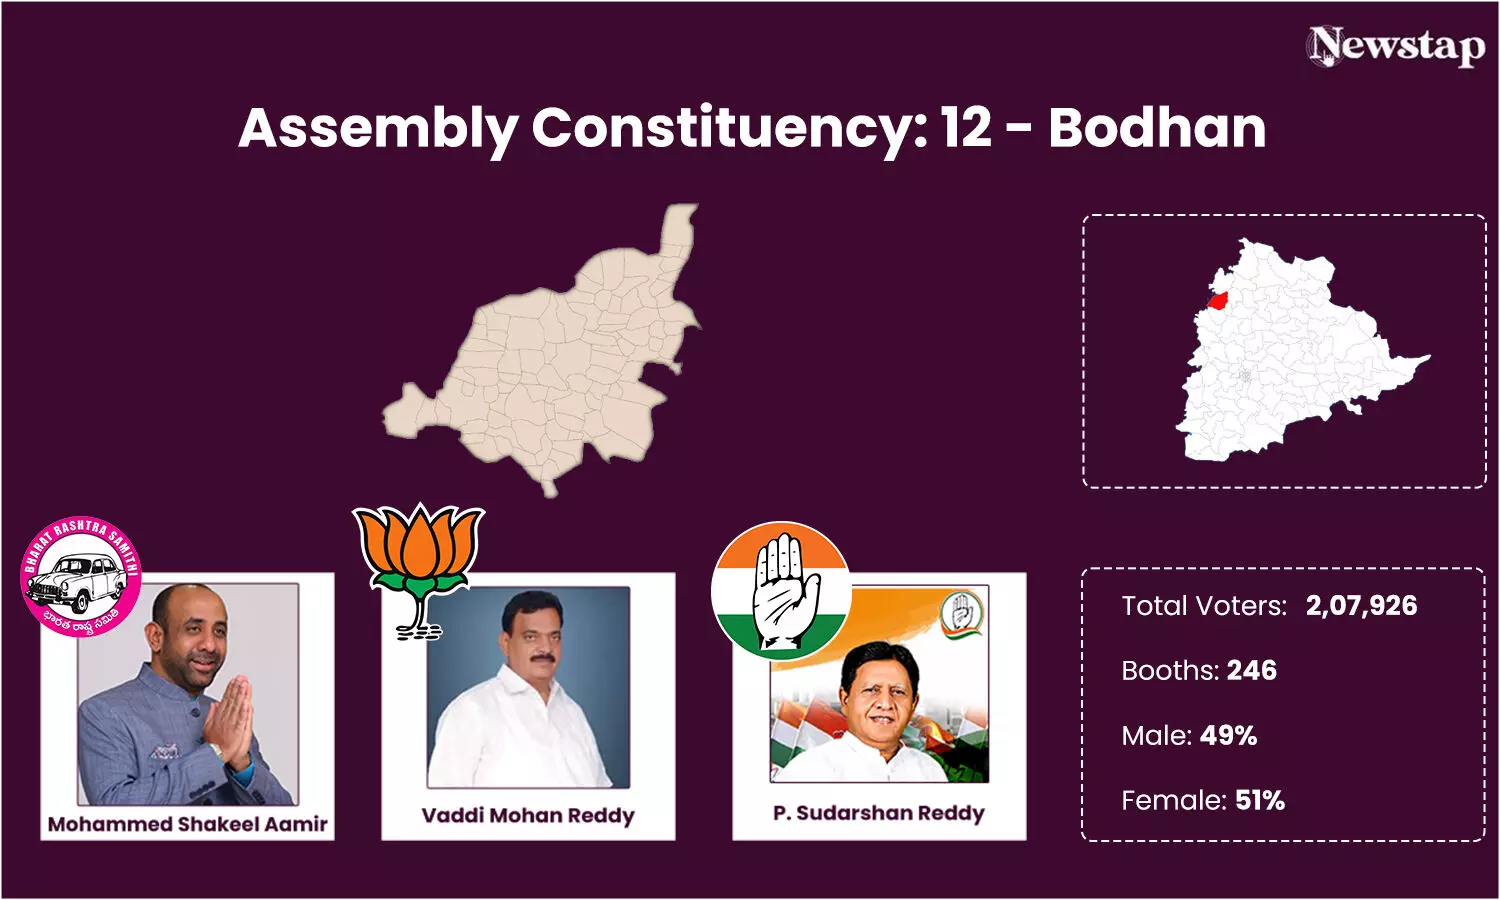 Veteran Congress leader Sudarshan Reddy trying to regain lost ground in Bodhan, stronghold of BRS